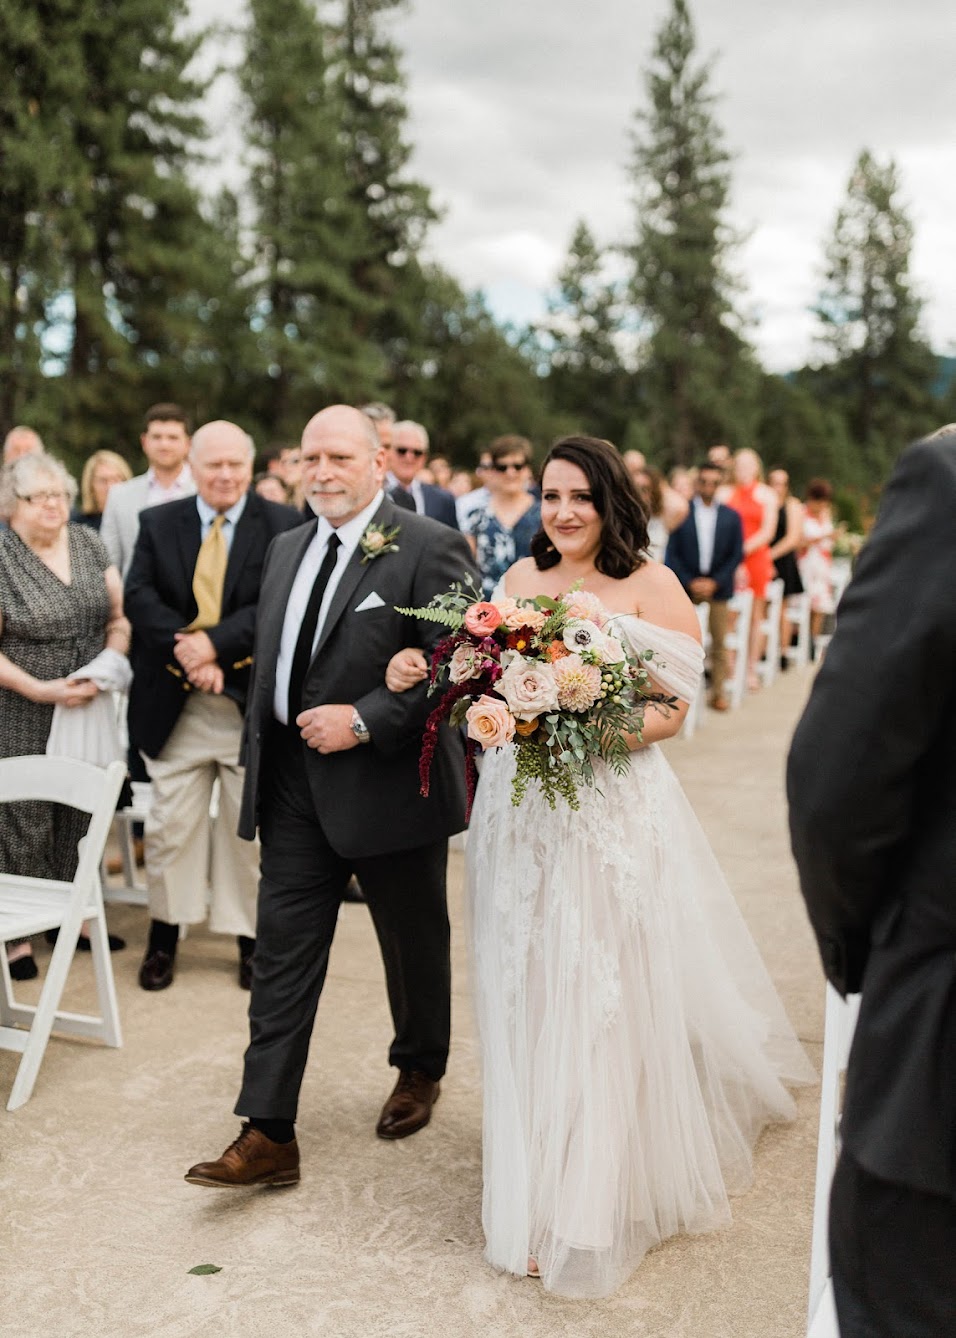 The bride and her father reach the top of the aisle, all of the guests are standing and watching them.